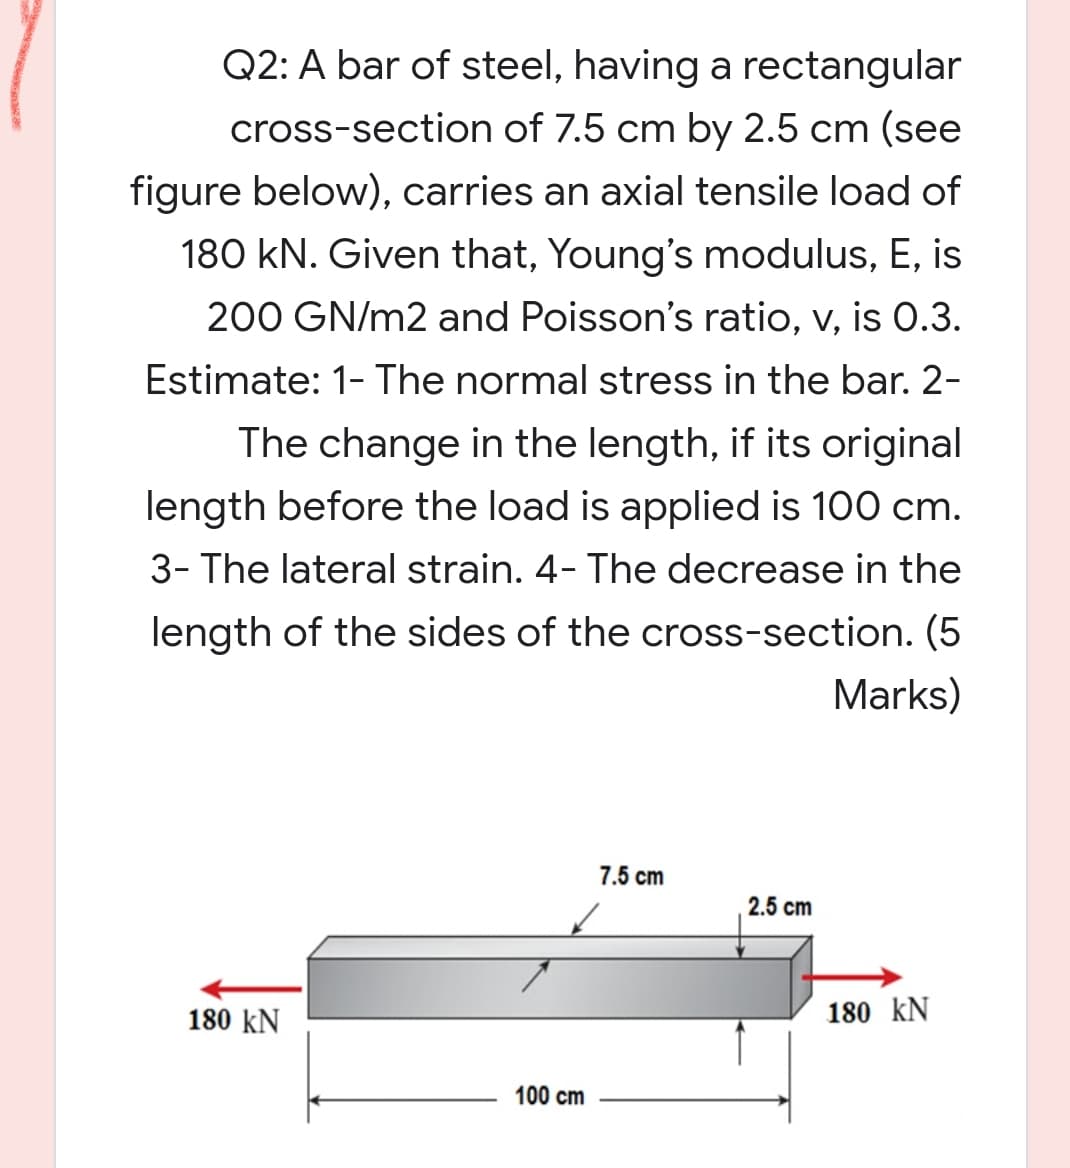 Q2: A bar of steel, having a rectangular
cross-section of 7.5 cm by 2.5 cm (see
figure below), carries an axial tensile load of
180 kN. Given that, Young's modulus, E, is
200 GN/m2 and Poisson's ratio, v, is 0.3.
Estimate: 1- The normal stress in the bar. 2-
The change in the length, if its original
length before the load is applied is 100 cm.
3- The lateral strain. 4- The decrease in the
length of the sides of the cross-section. (5
Marks)
7.5 cm
2.5 cm
180 kN
180 kN
100 cm
